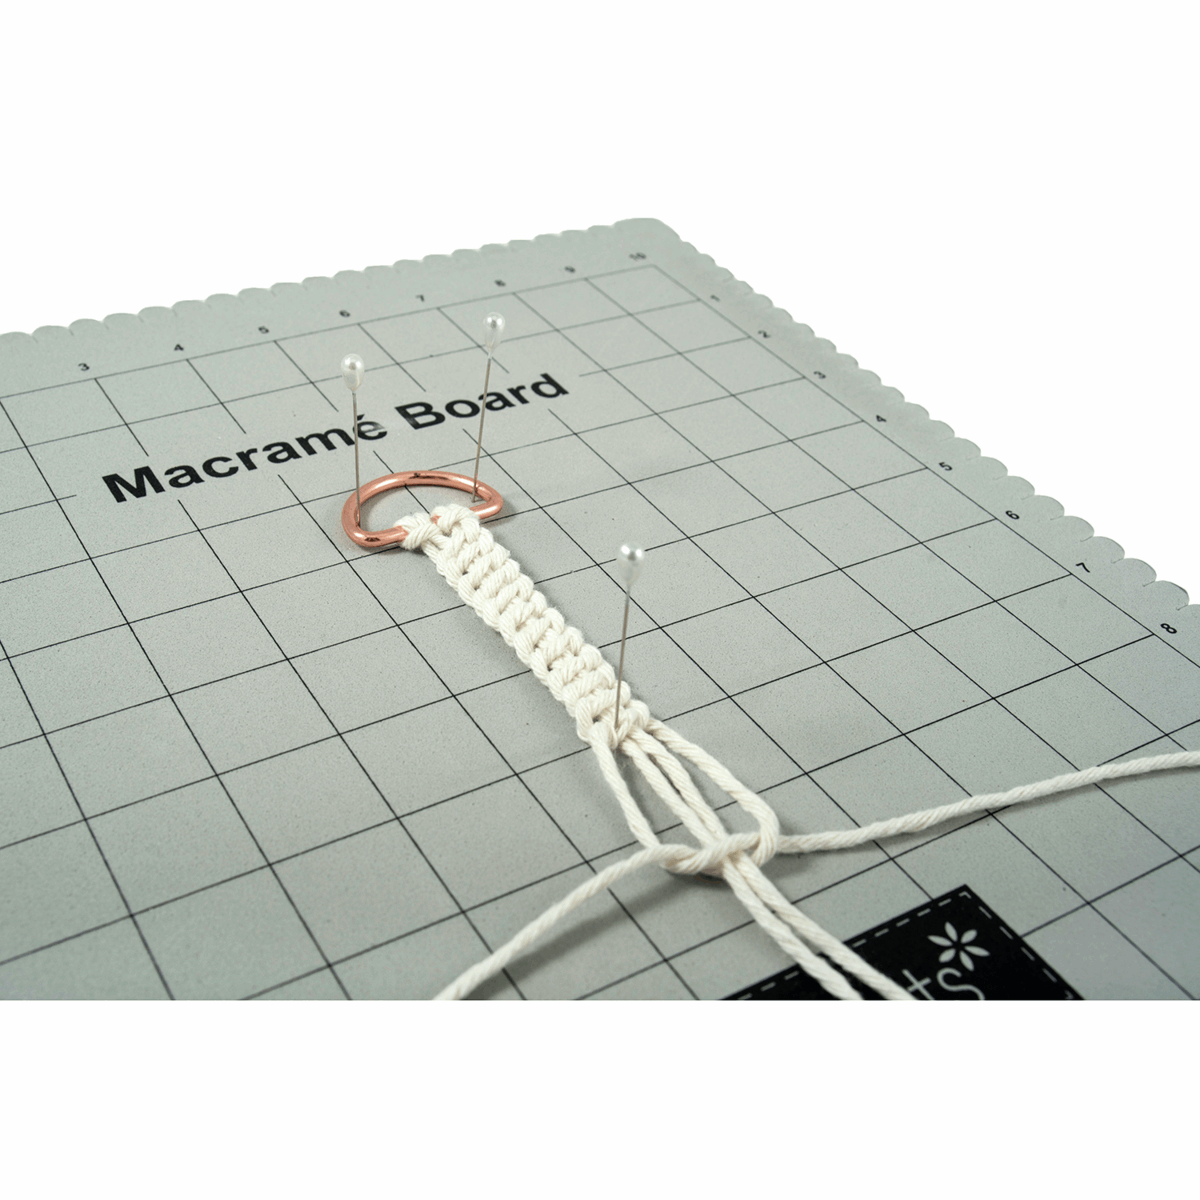 BEADSMITH Macramé Board 14 x 1 x 10 inches  BEADSMITH Macramé Board 14 x 1  x 10 inches 👉👉👉  This macramé board designed by  Anne Dicker from the Bead Smith